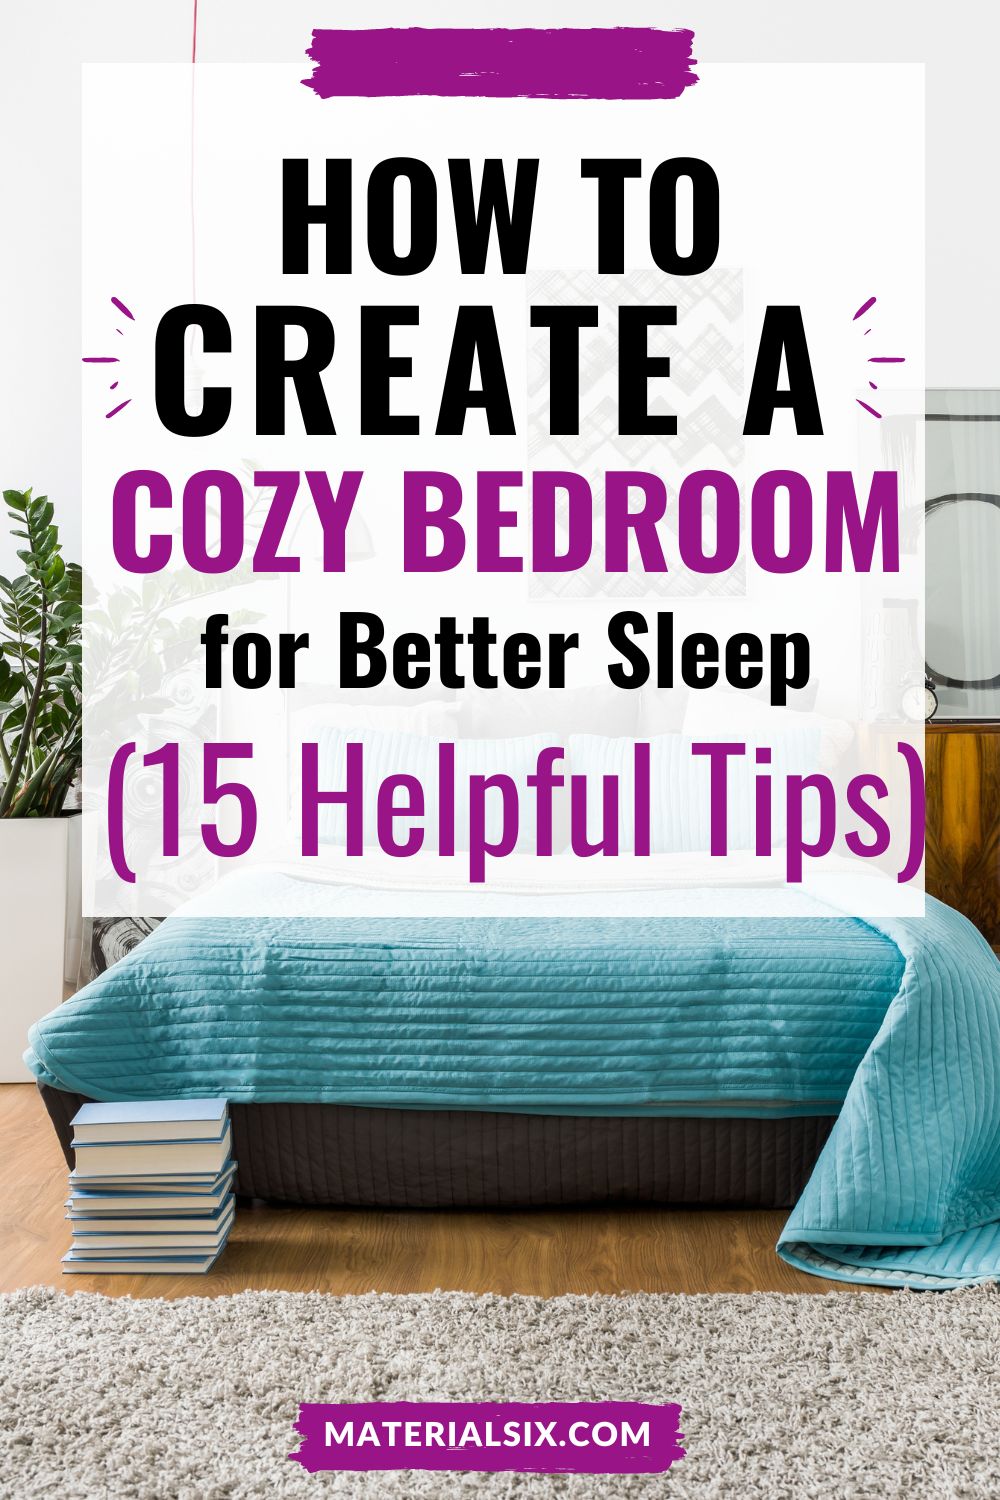 How to Create a Cozy Bedroom for Better Sleep (15 Helpful Tips)